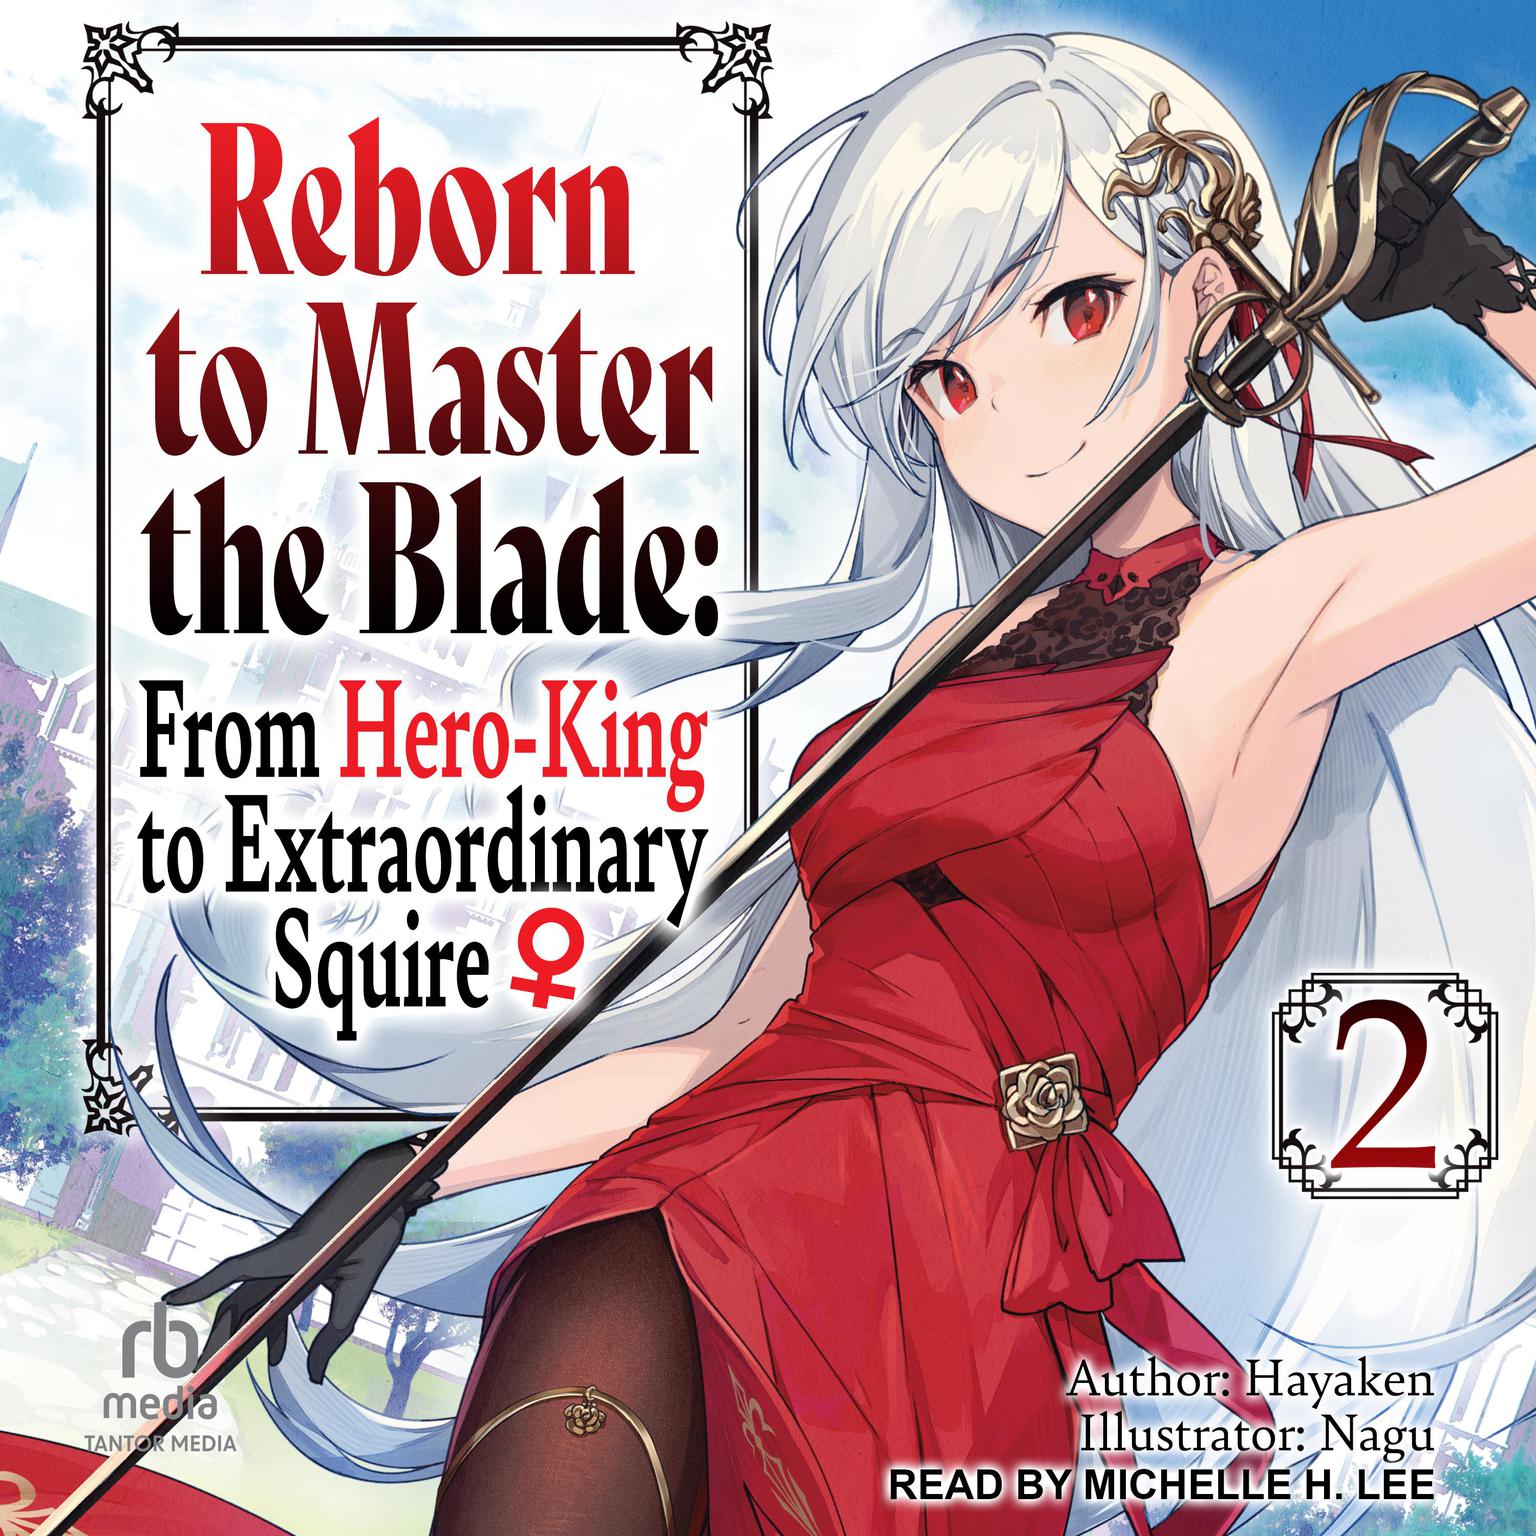 Reborn to Master the Blade: From Hero-King to Extraordinary Squire: Volume 2 Audiobook, by Hayaken 